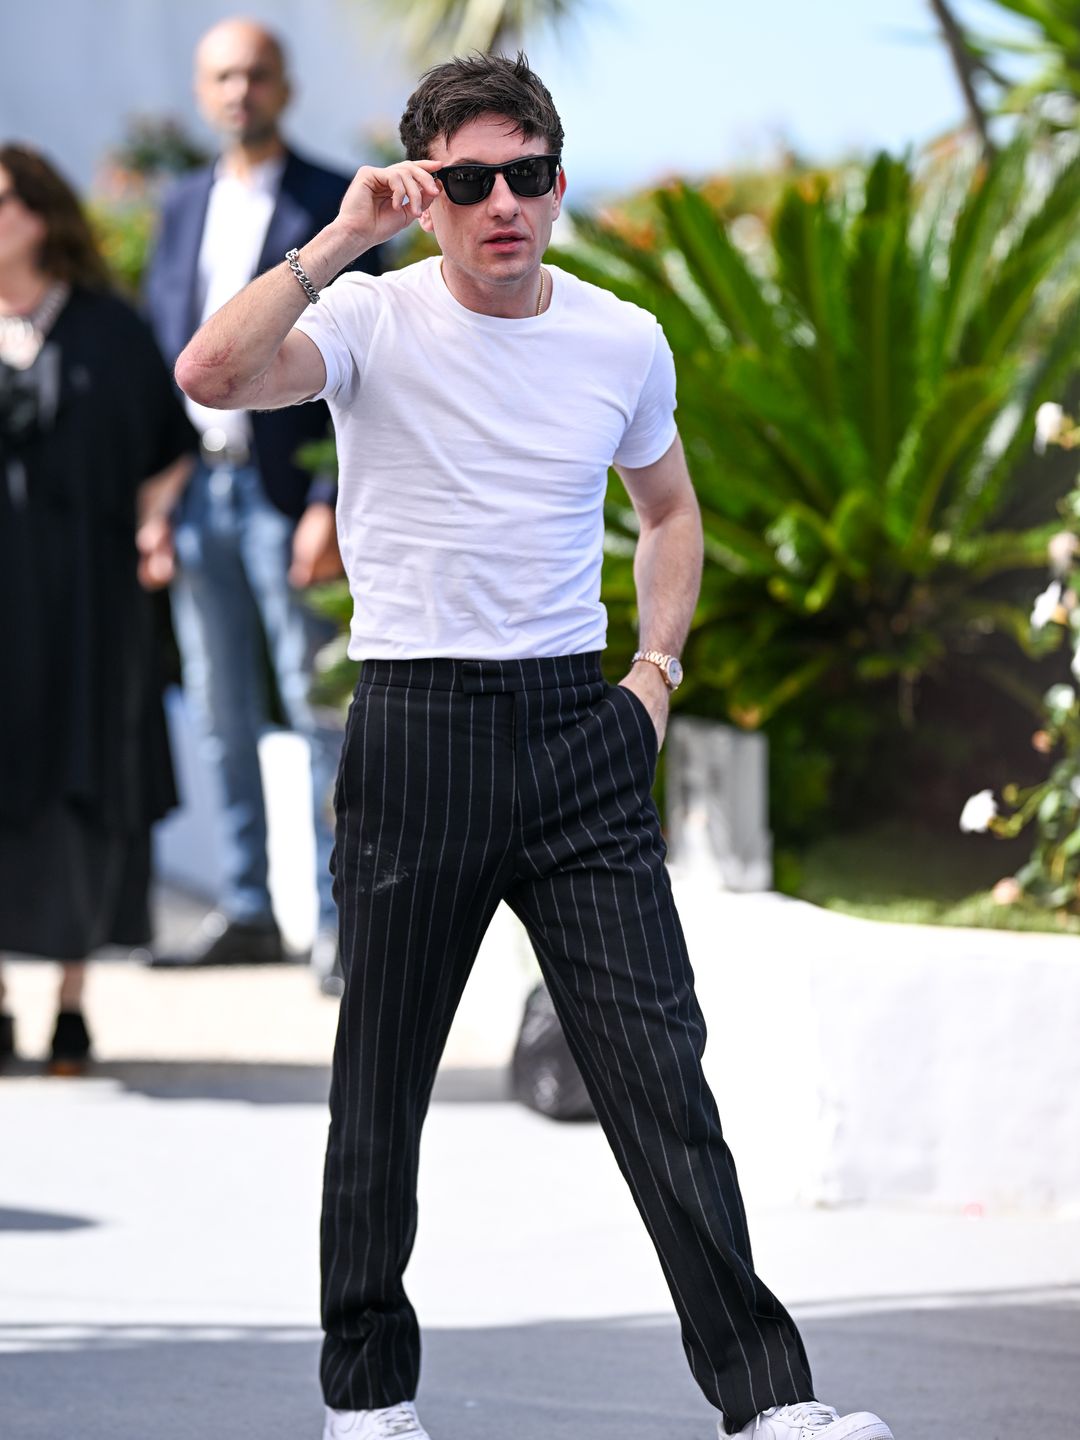 Barry Keoghan in a white shirt, pinstripe trousers and sunglasses